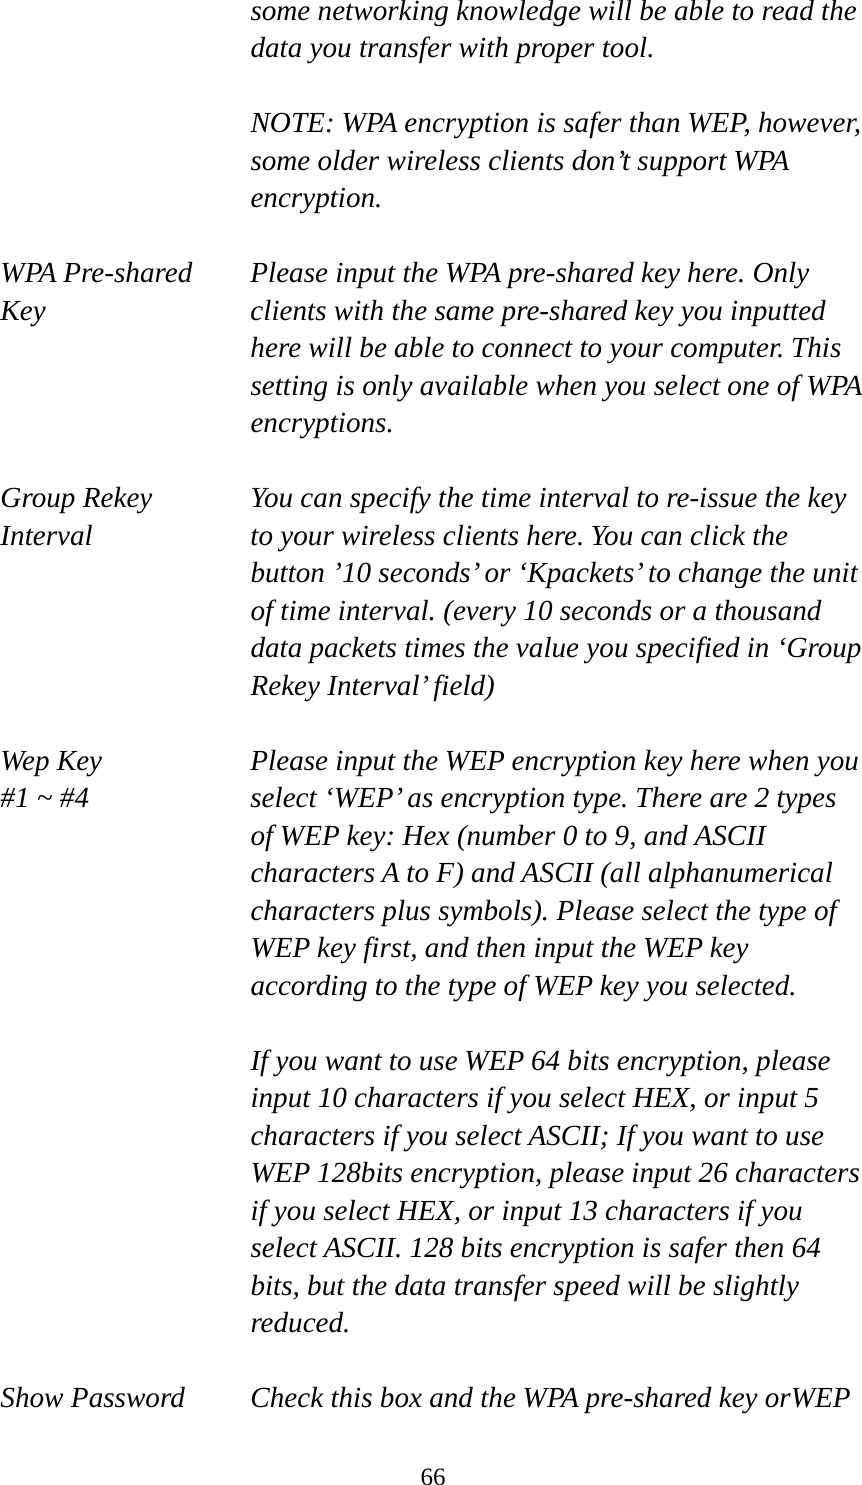  66some networking knowledge will be able to read the data you transfer with proper tool.  NOTE: WPA encryption is safer than WEP, however, some older wireless clients don’t support WPA encryption.  WPA Pre-shared  Please input the WPA pre-shared key here. Only   Key  clients with the same pre-shared key you inputted   here will be able to connect to your computer. This setting is only available when you select one of WPA encryptions.  Group Rekey  You can specify the time interval to re-issue the key Interval  to your wireless clients here. You can click the button ’10 seconds’ or ‘Kpackets’ to change the unit of time interval. (every 10 seconds or a thousand data packets times the value you specified in ‘Group Rekey Interval’ field)  Wep Key  Please input the WEP encryption key here when you   #1 ~ #4  select ‘WEP’ as encryption type. There are 2 types of WEP key: Hex (number 0 to 9, and ASCII characters A to F) and ASCII (all alphanumerical characters plus symbols). Please select the type of WEP key first, and then input the WEP key according to the type of WEP key you selected.    If you want to use WEP 64 bits encryption, please input 10 characters if you select HEX, or input 5 characters if you select ASCII; If you want to use WEP 128bits encryption, please input 26 characters if you select HEX, or input 13 characters if you select ASCII. 128 bits encryption is safer then 64 bits, but the data transfer speed will be slightly reduced.  Show Password  Check this box and the WPA pre-shared key orWEP 